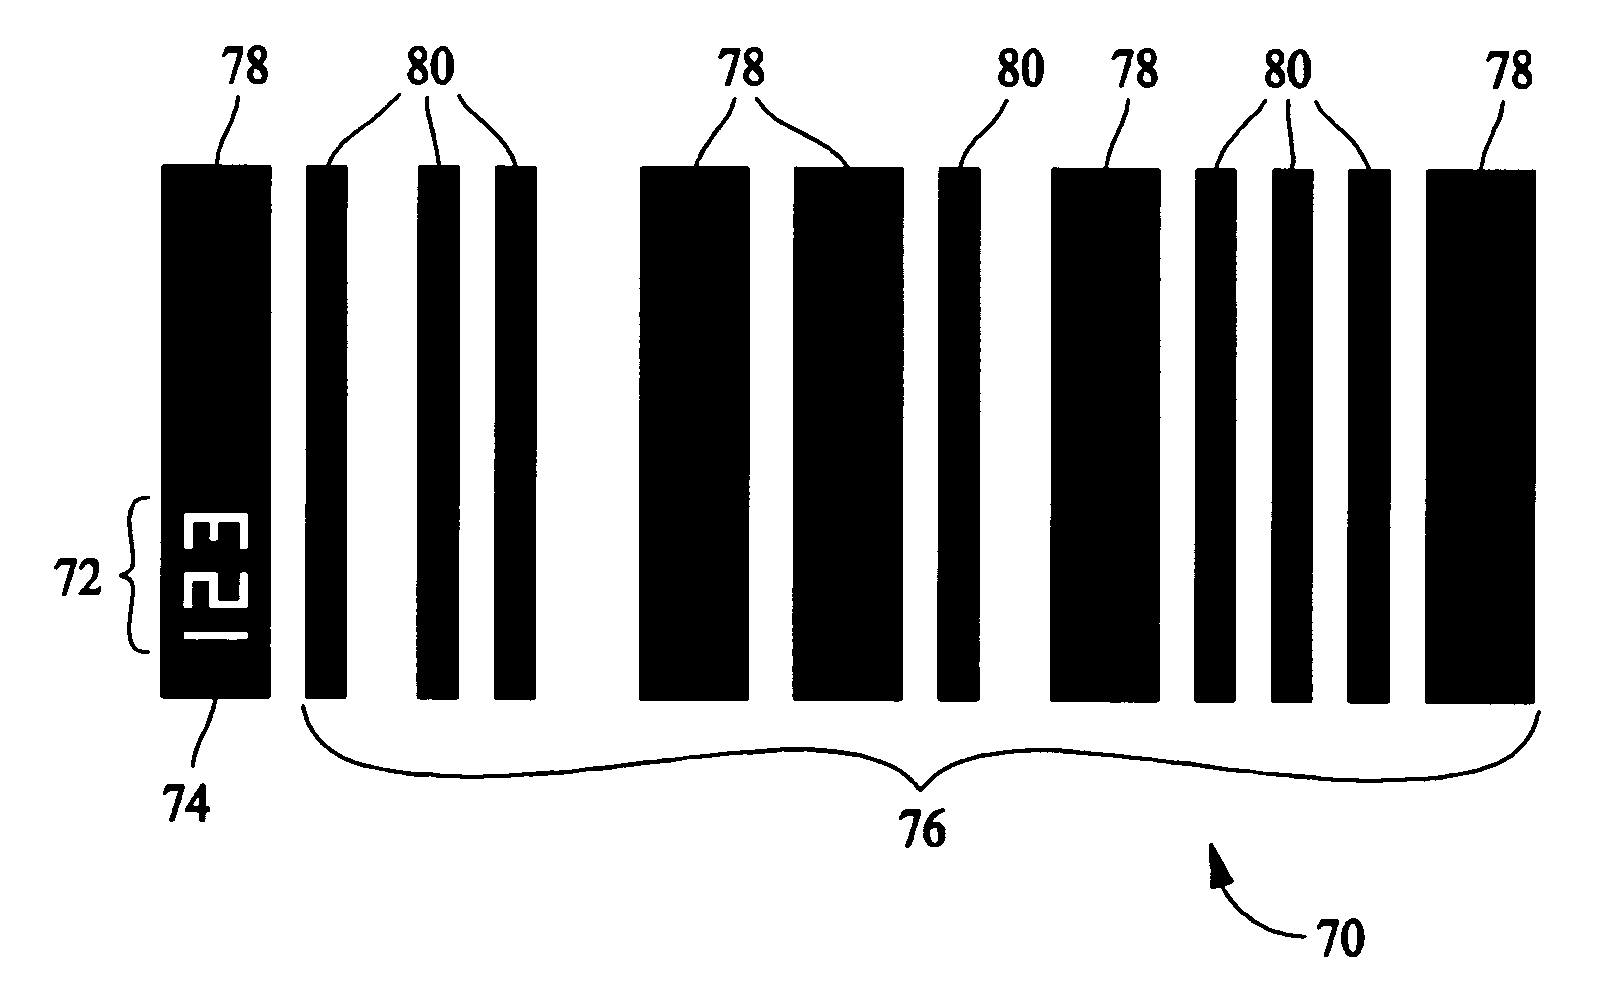 Barcodes including embedded security features and space saving interleaved text